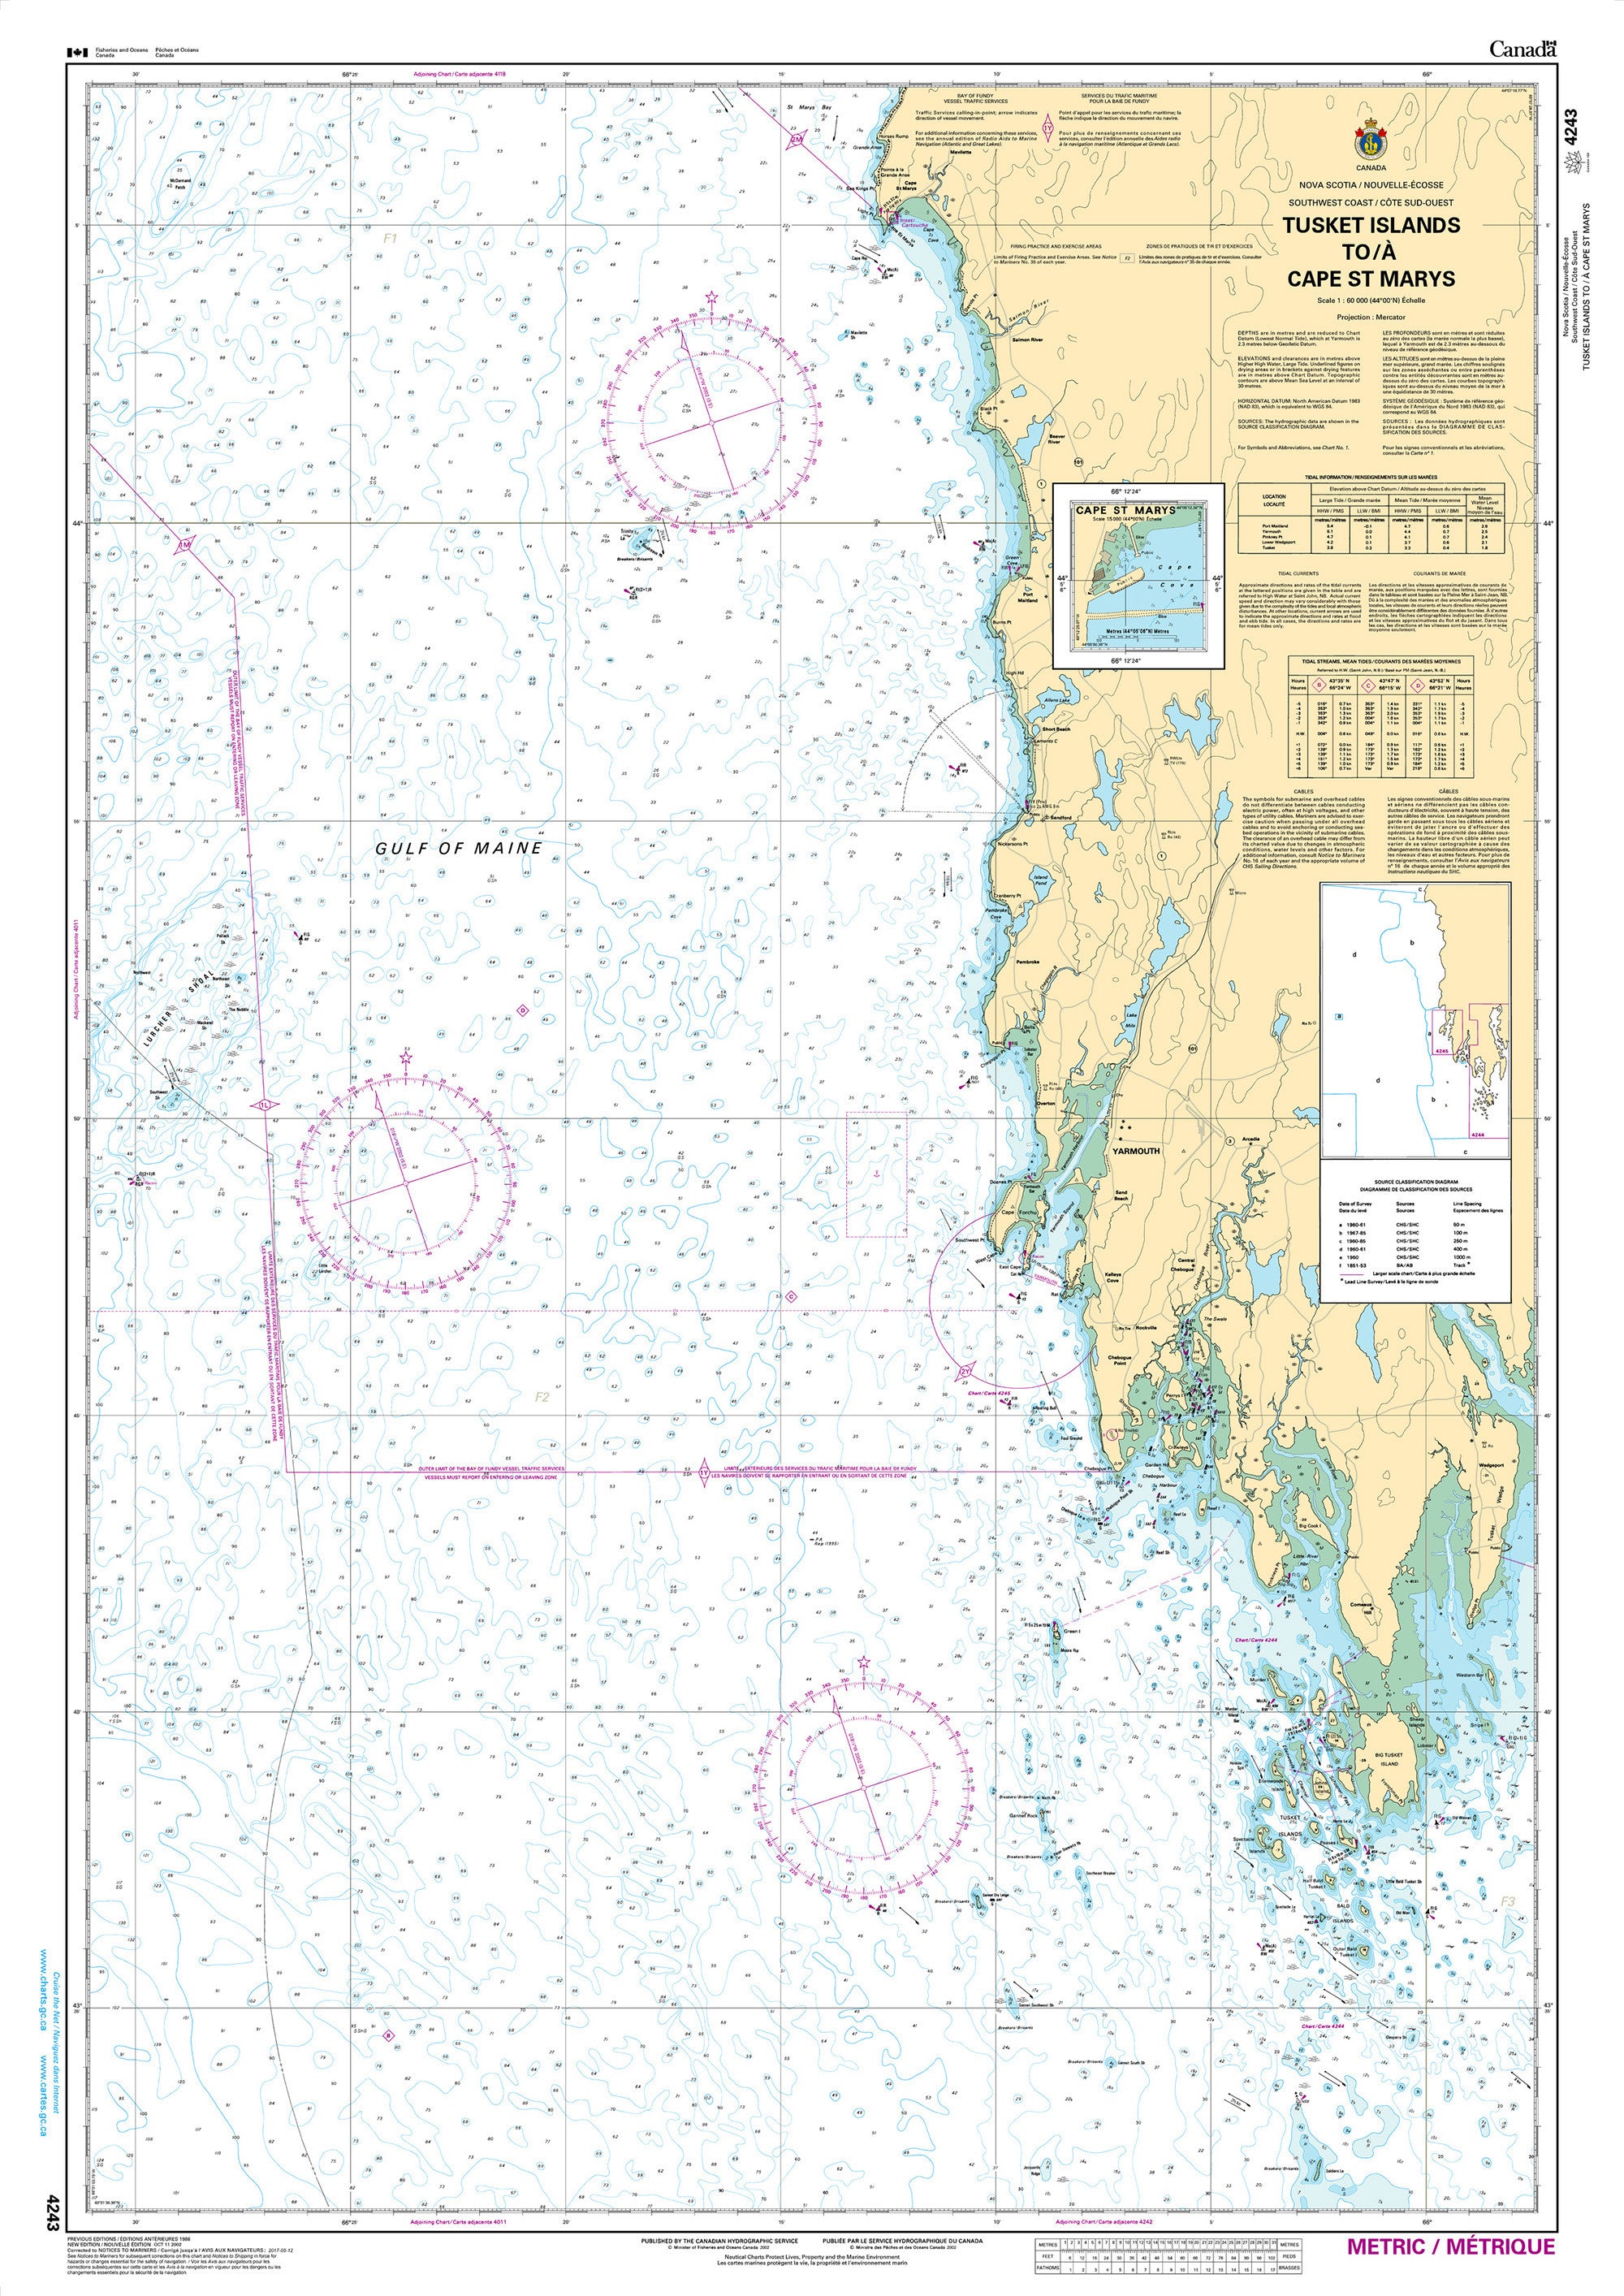 Canadian Hydrographic Service Nautical Chart CHS4243: Tusket Islands to/à Cape St. Marys